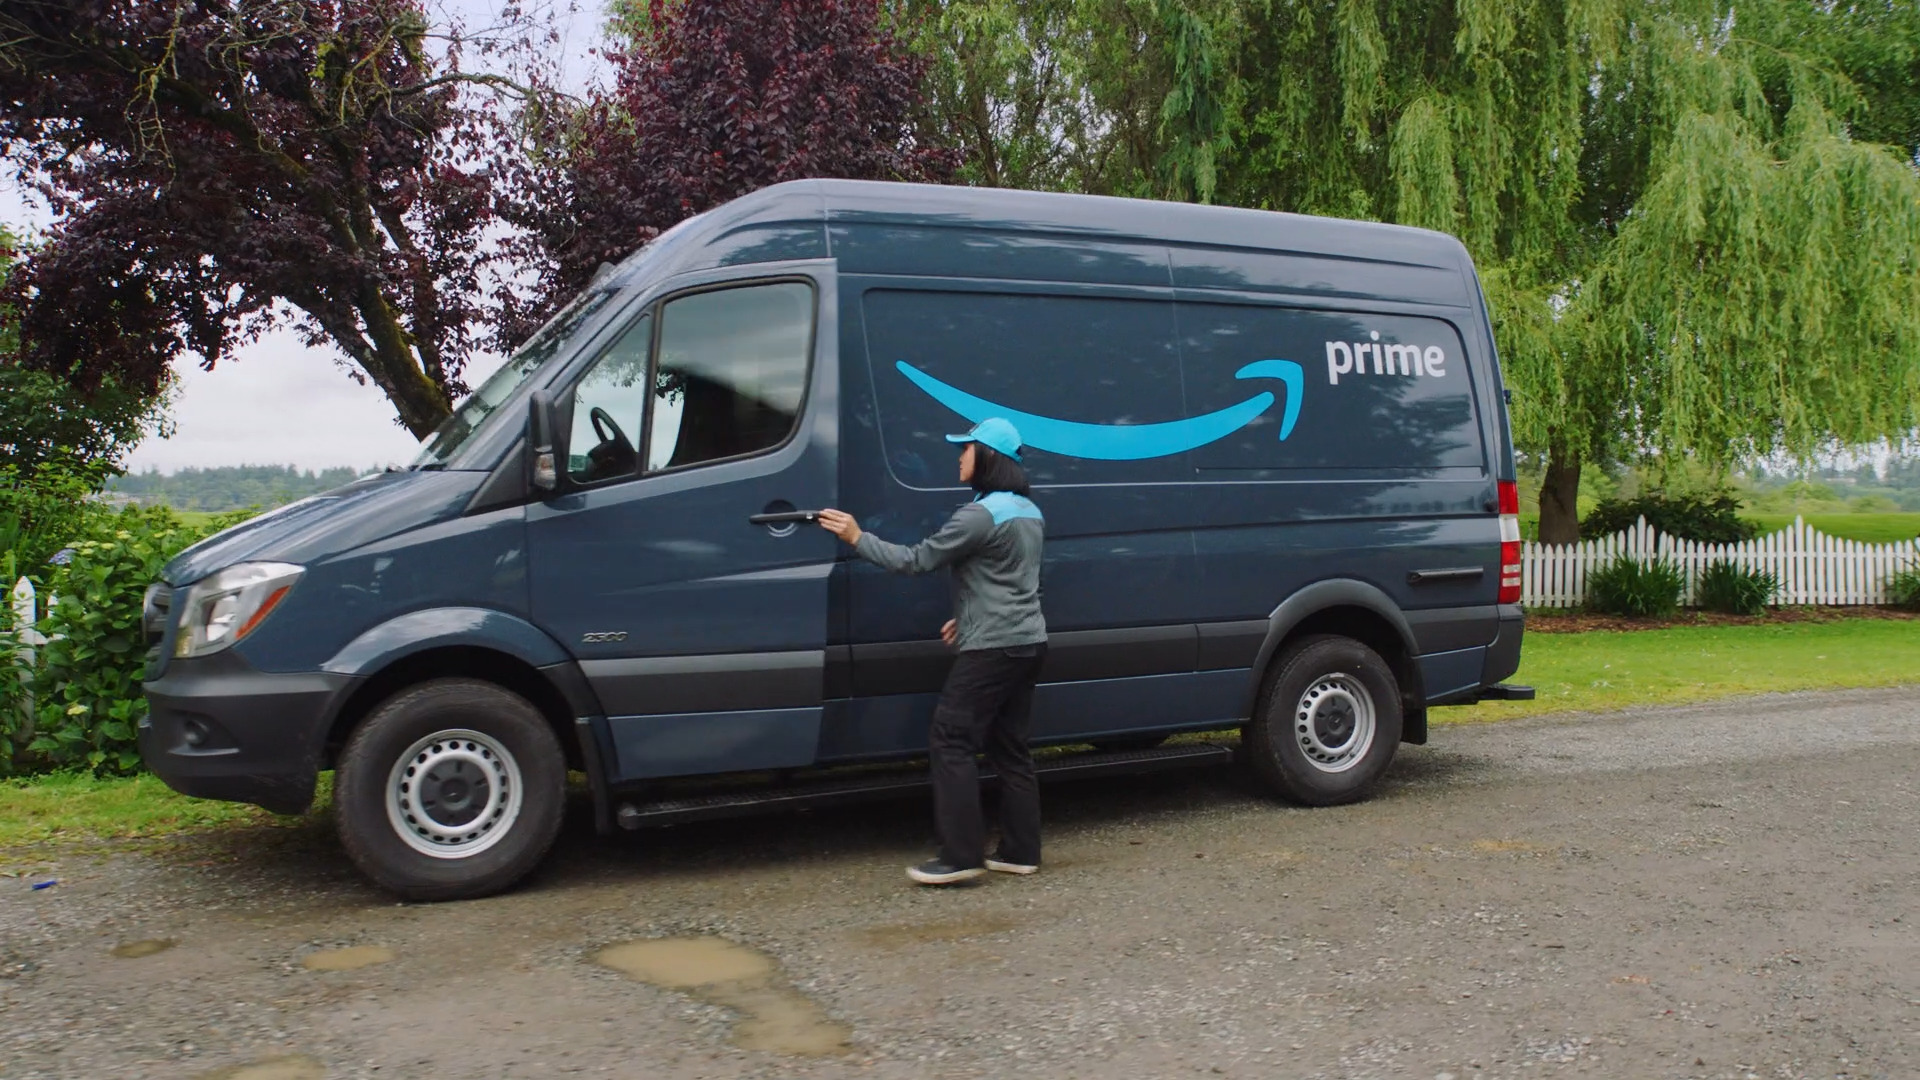 Amazon delivery contractors operate with little oversight, report finds |  Ars Technica